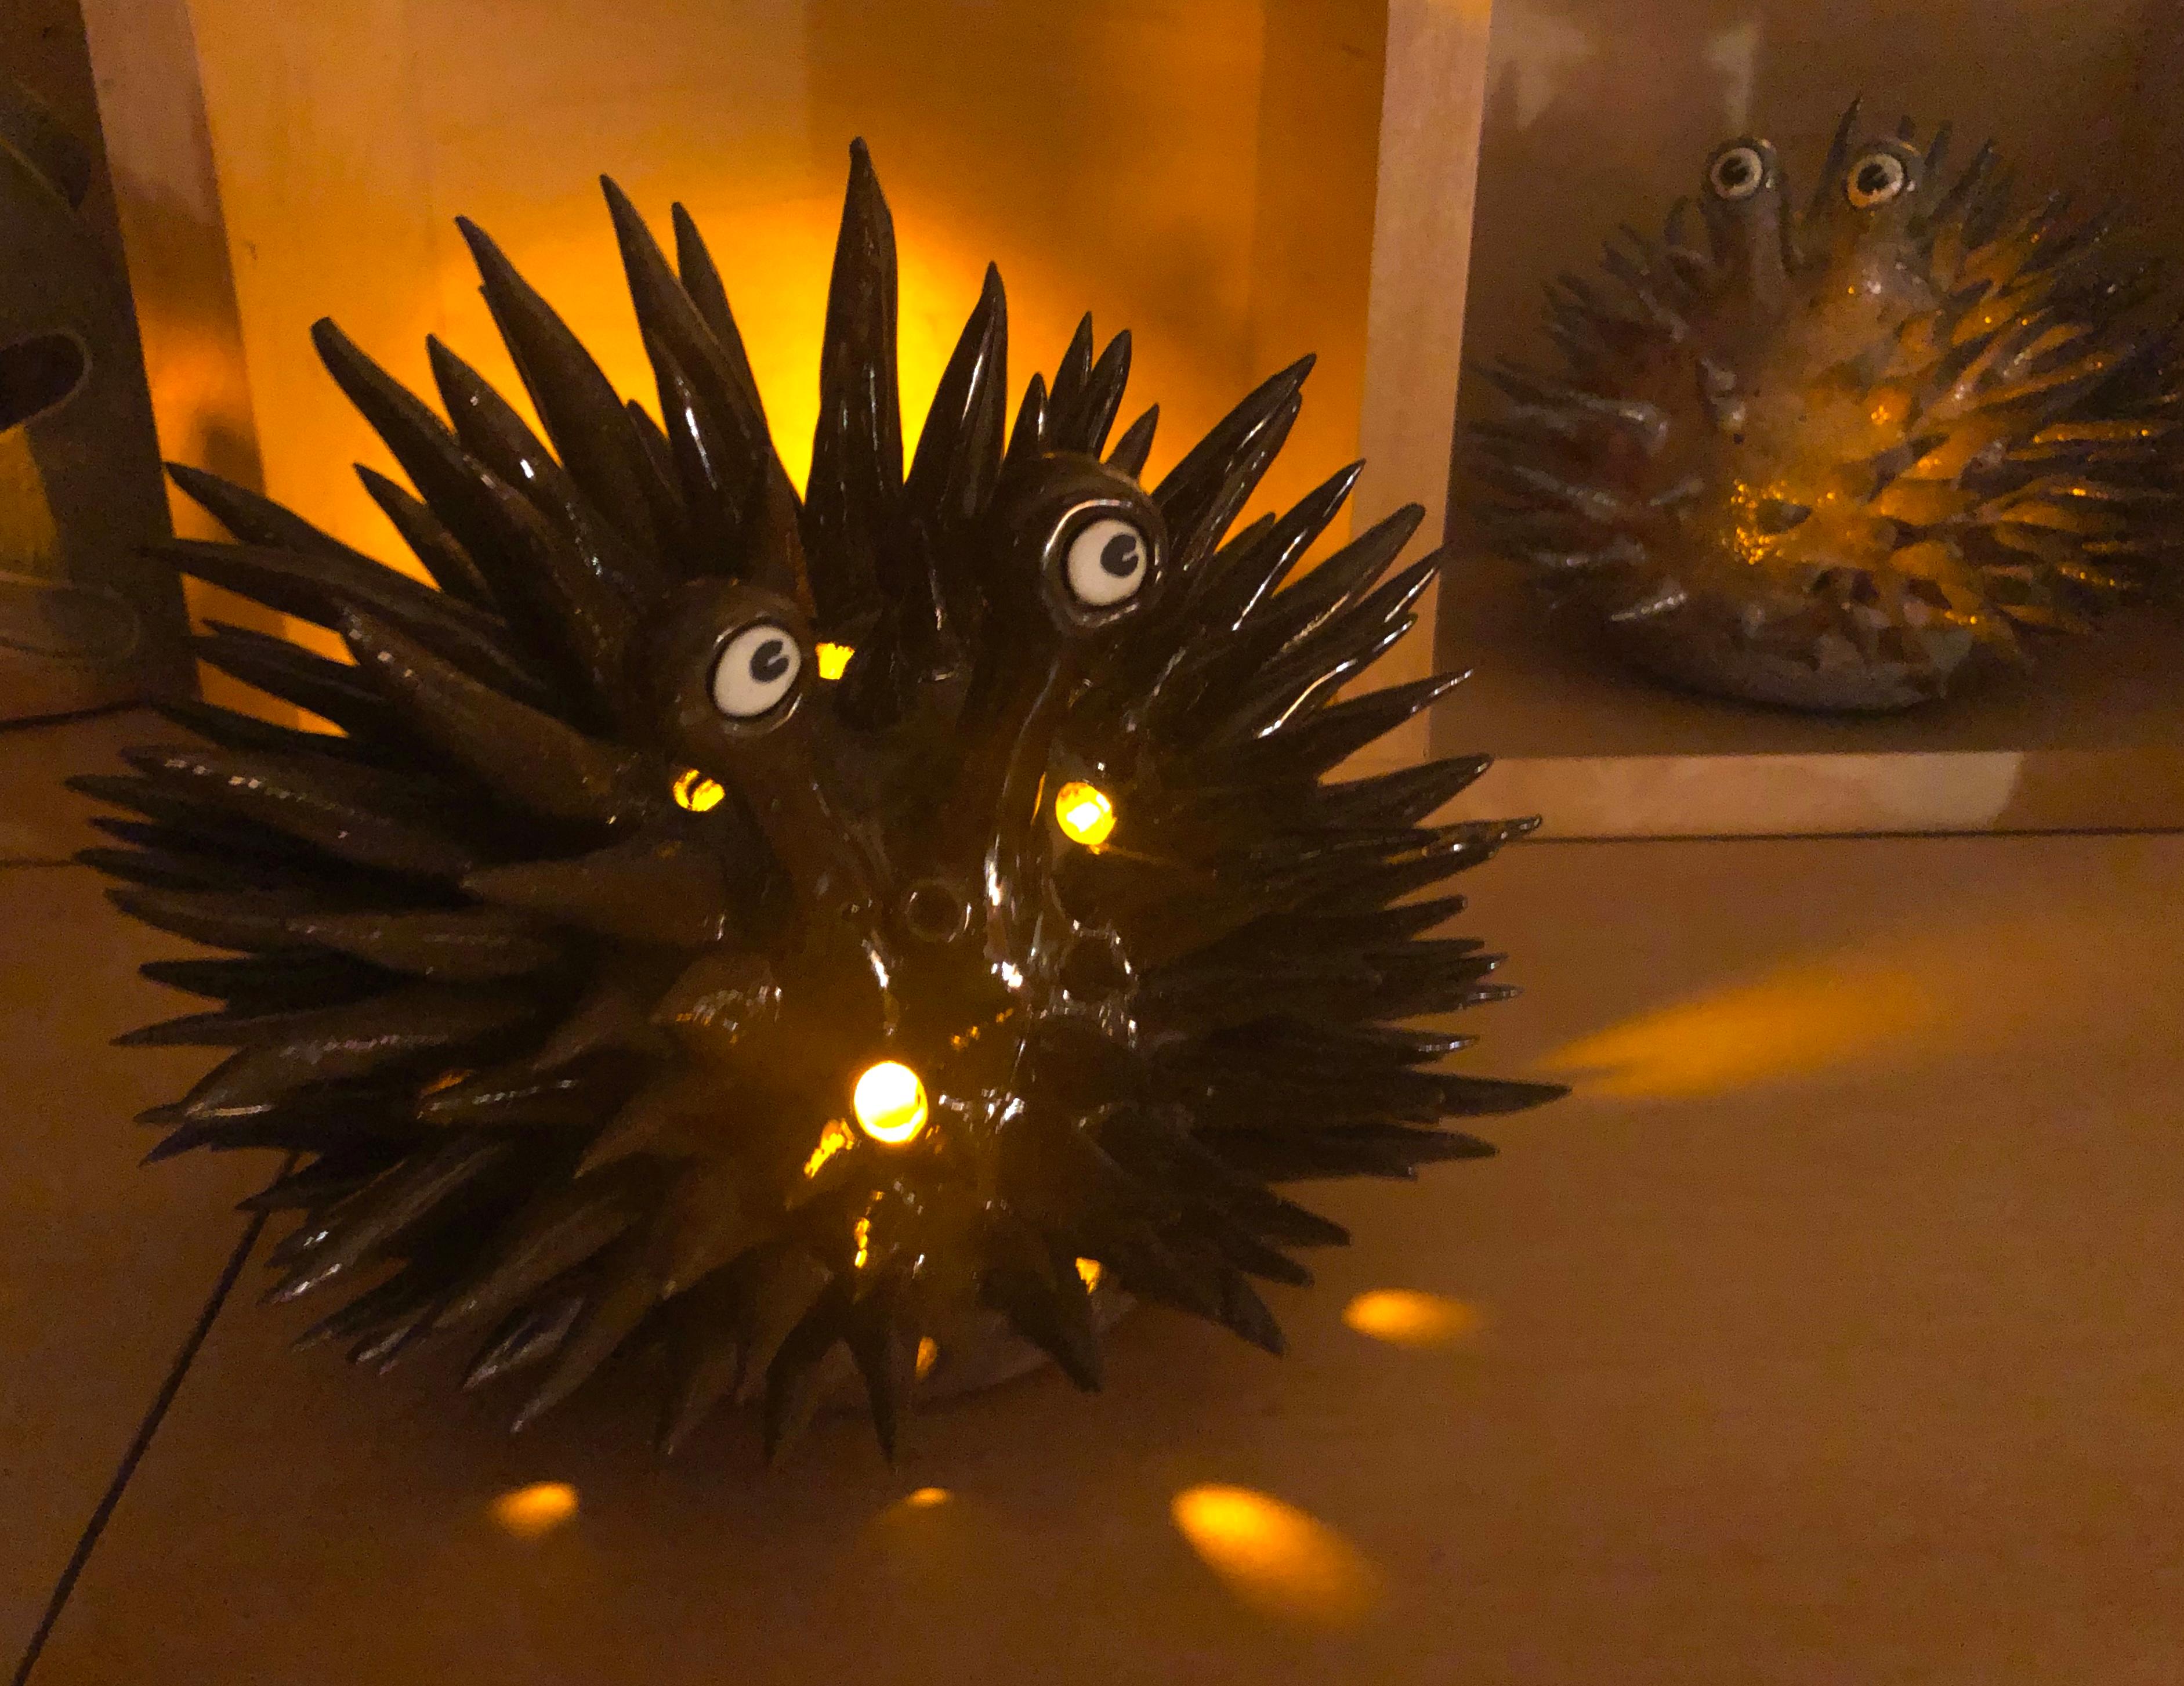 Dark Brown Urchin Candlelight Holder In New Condition For Sale In Walnut, CA